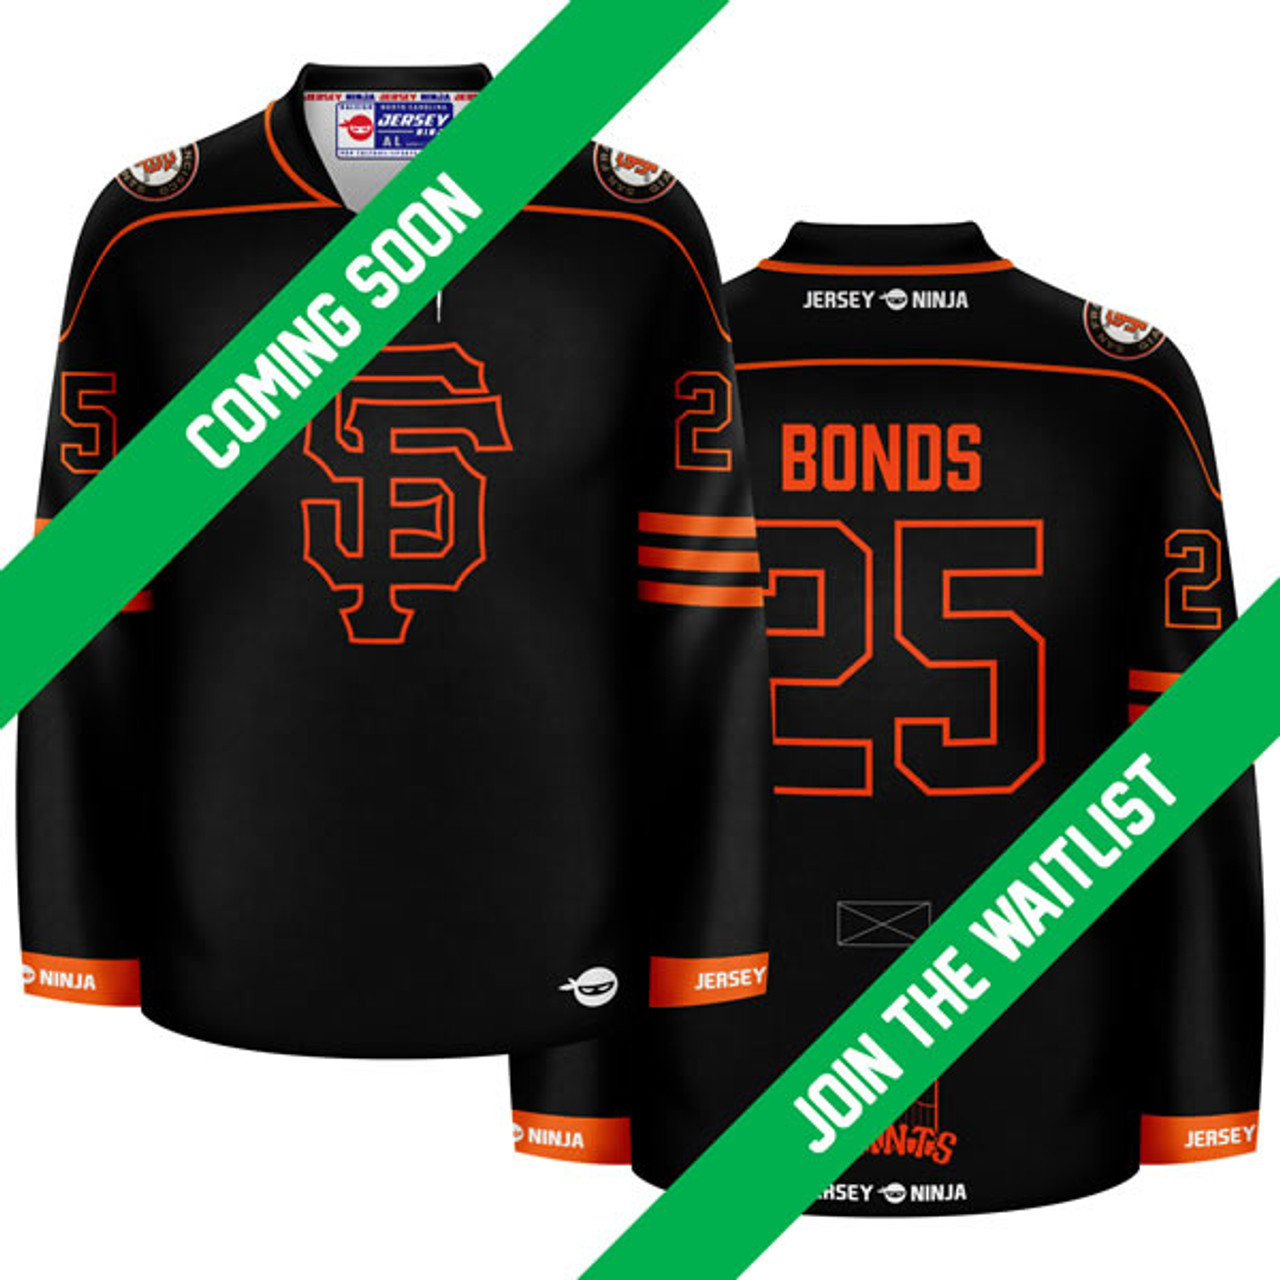 San Francisco Giants spring training jersey worn and signed by